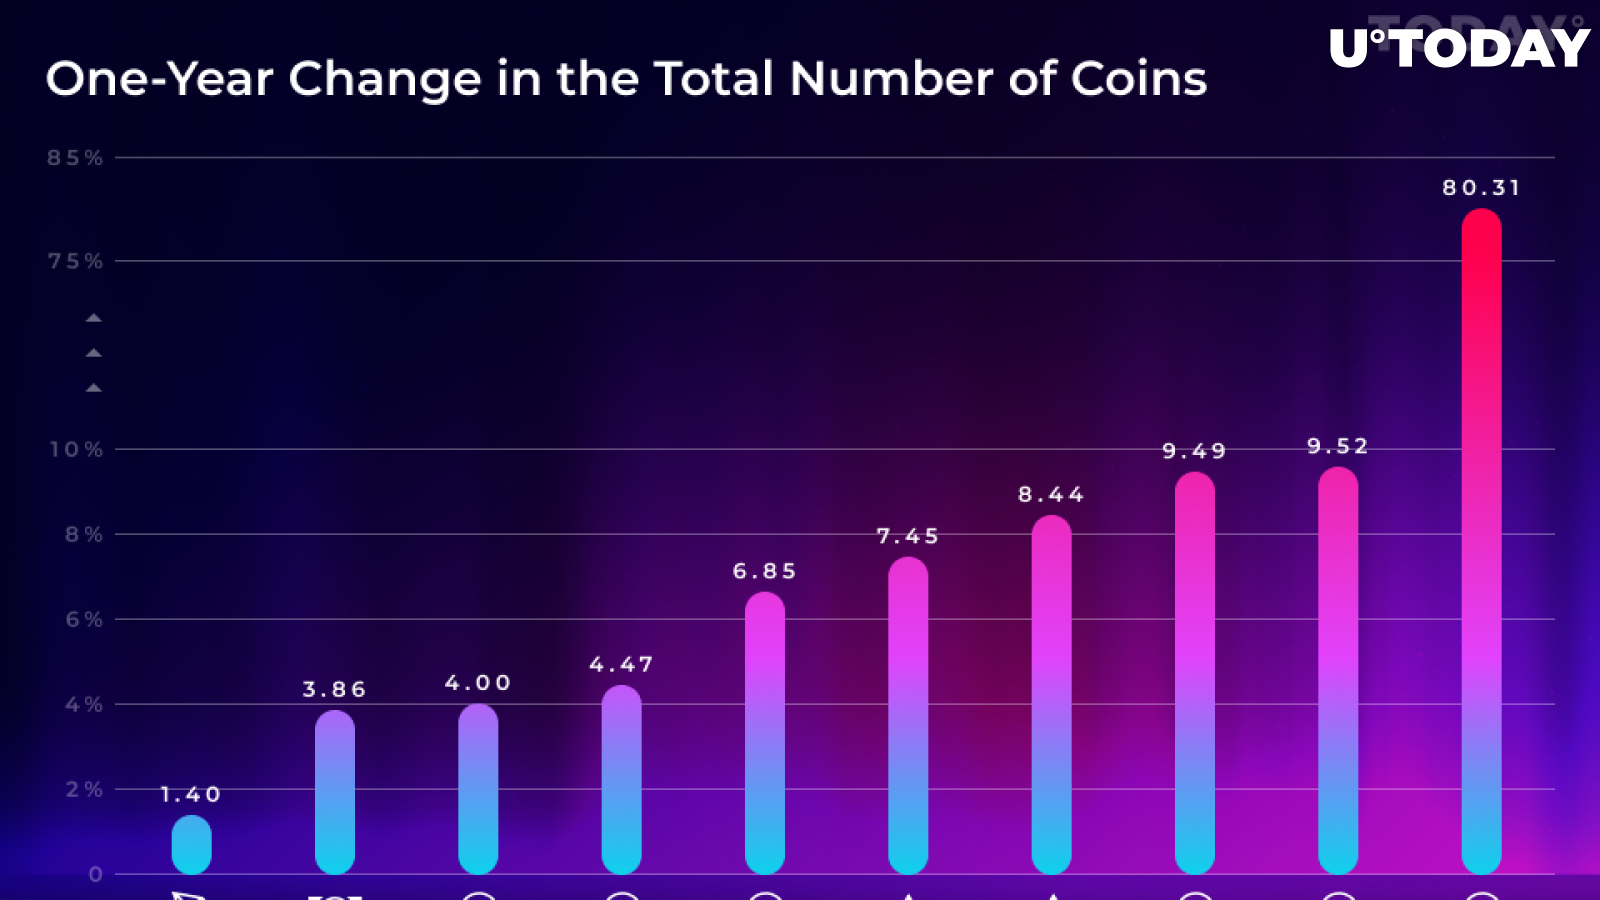 Zcash (ZEC), Litecoin (LTC), and Dash (DASH) Had Biggest One-Year Increase in Circulating Supply